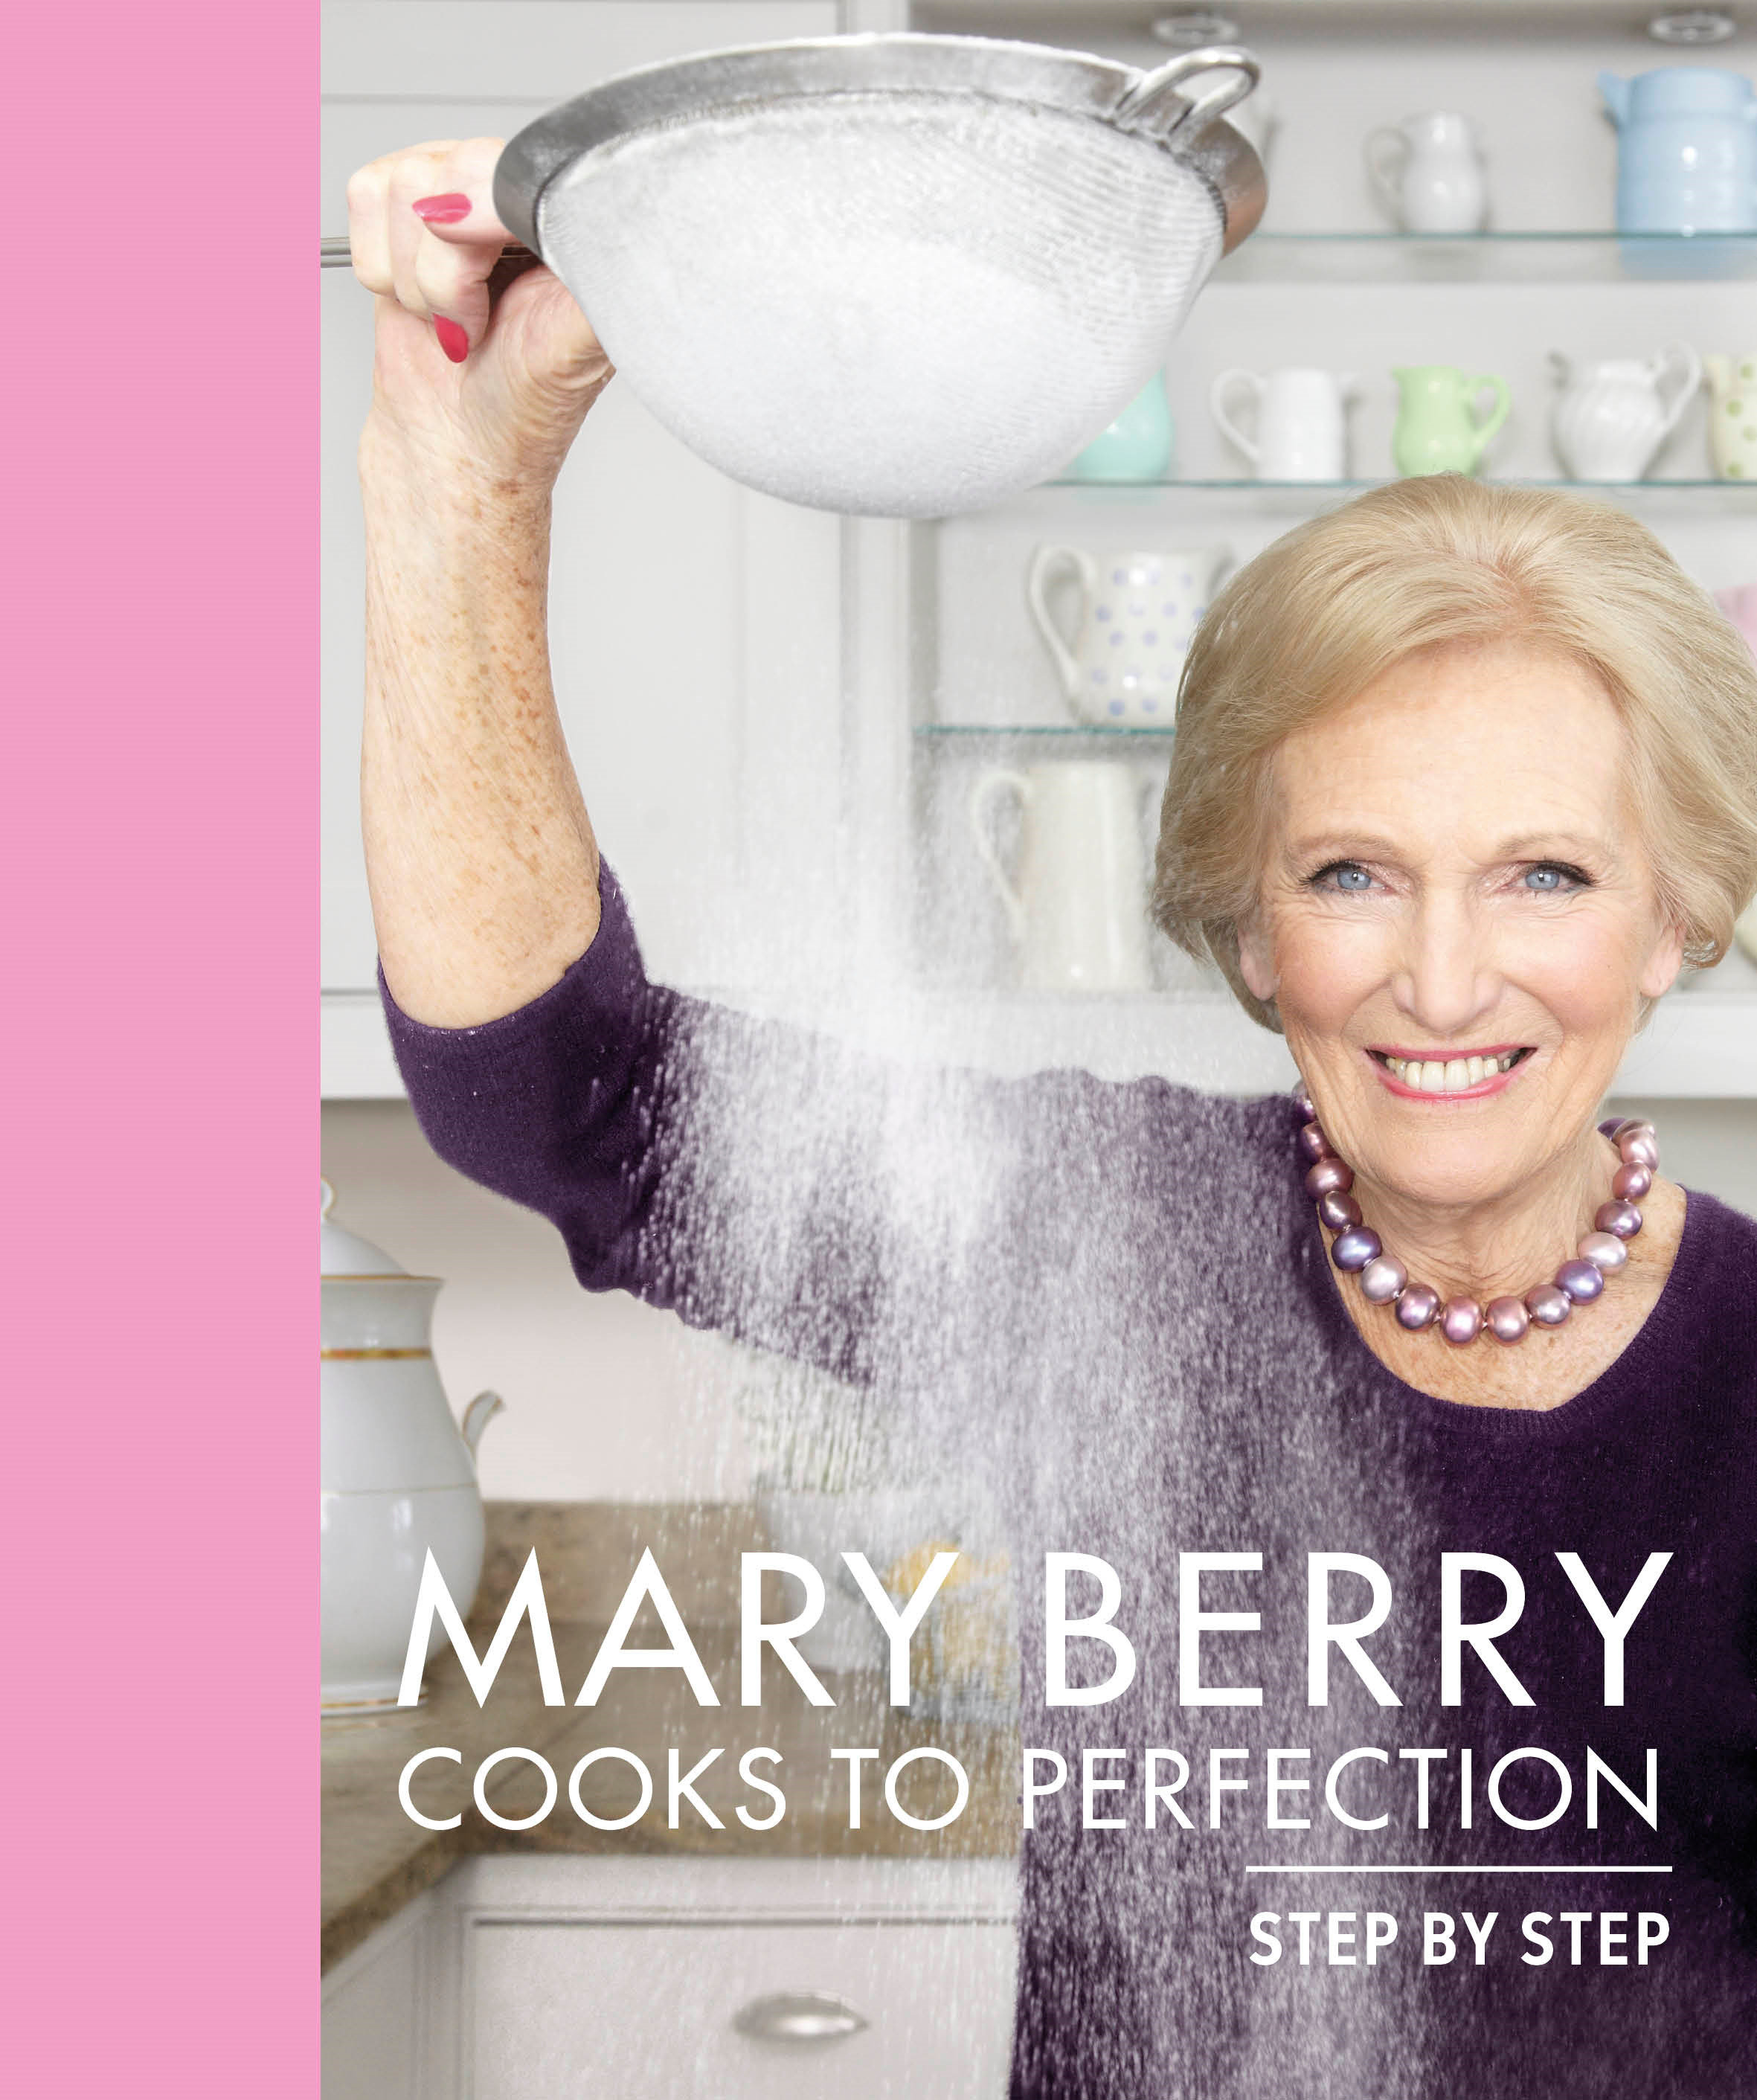 Mary Berry Cooks To Perfection (Hardcover Book)